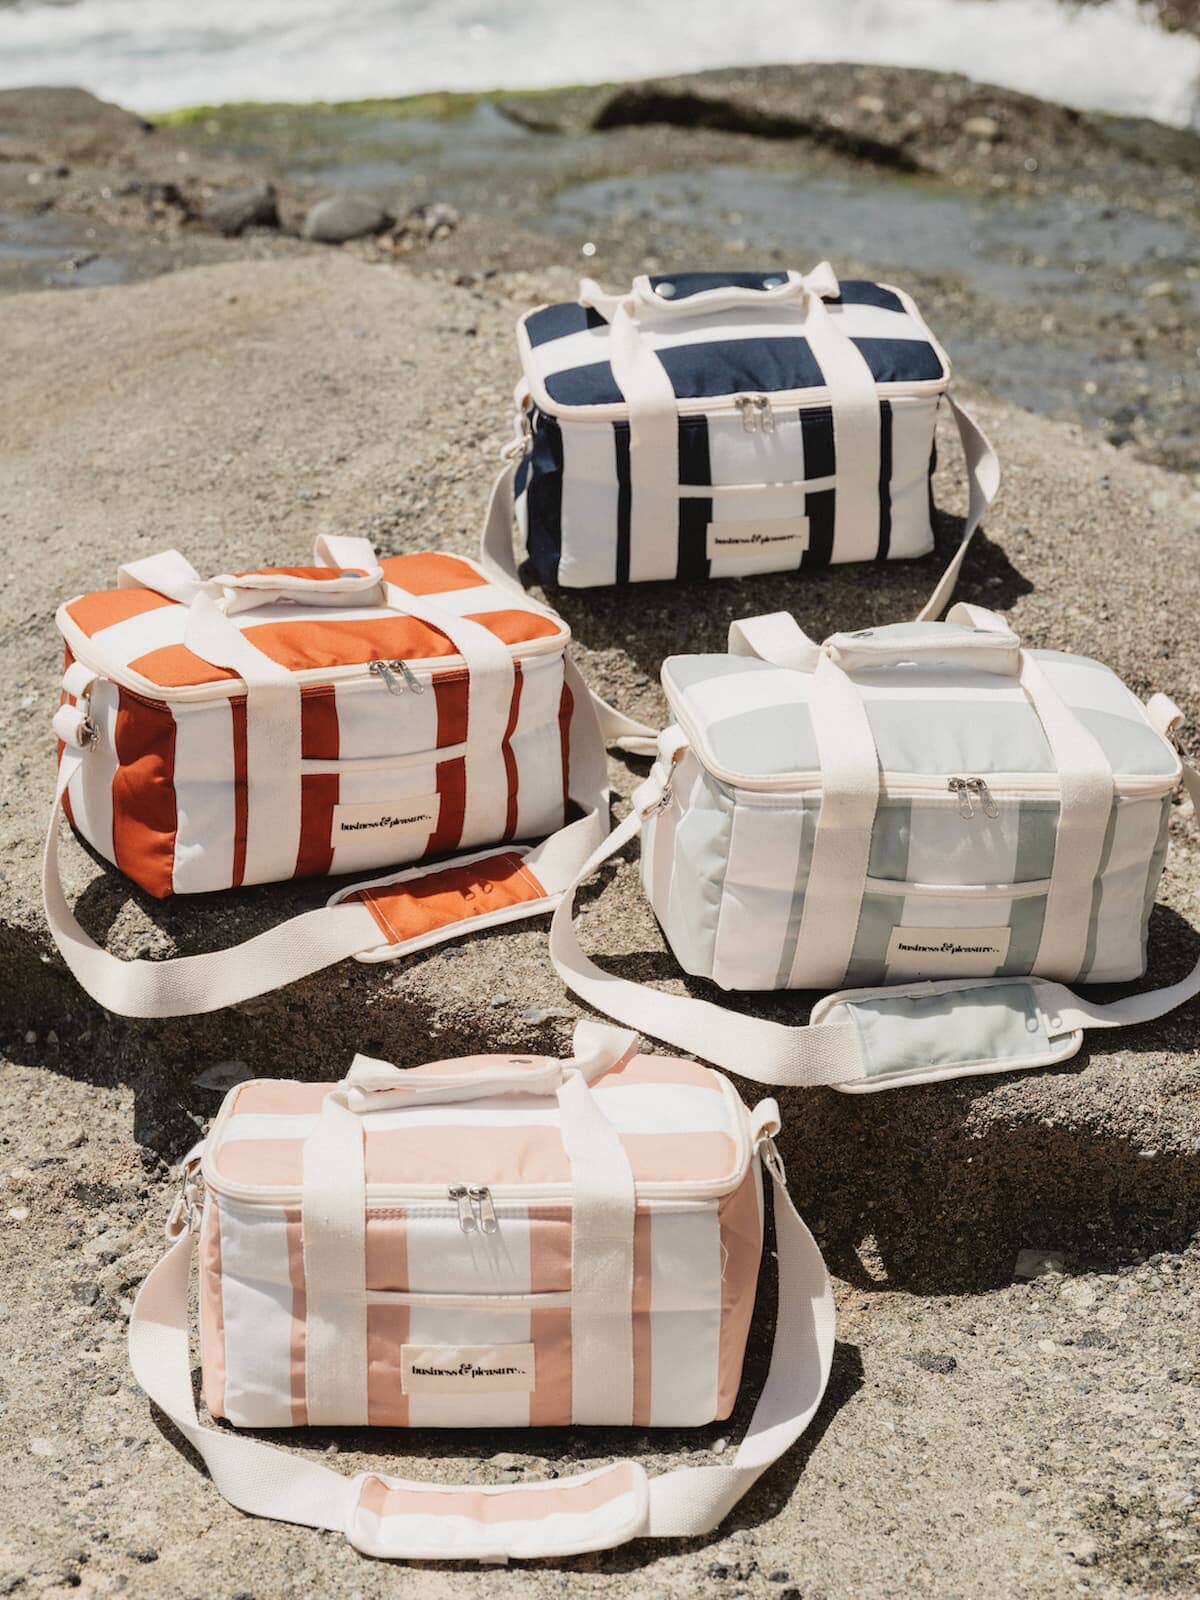 holiday cooler bags on the rocks at the beach